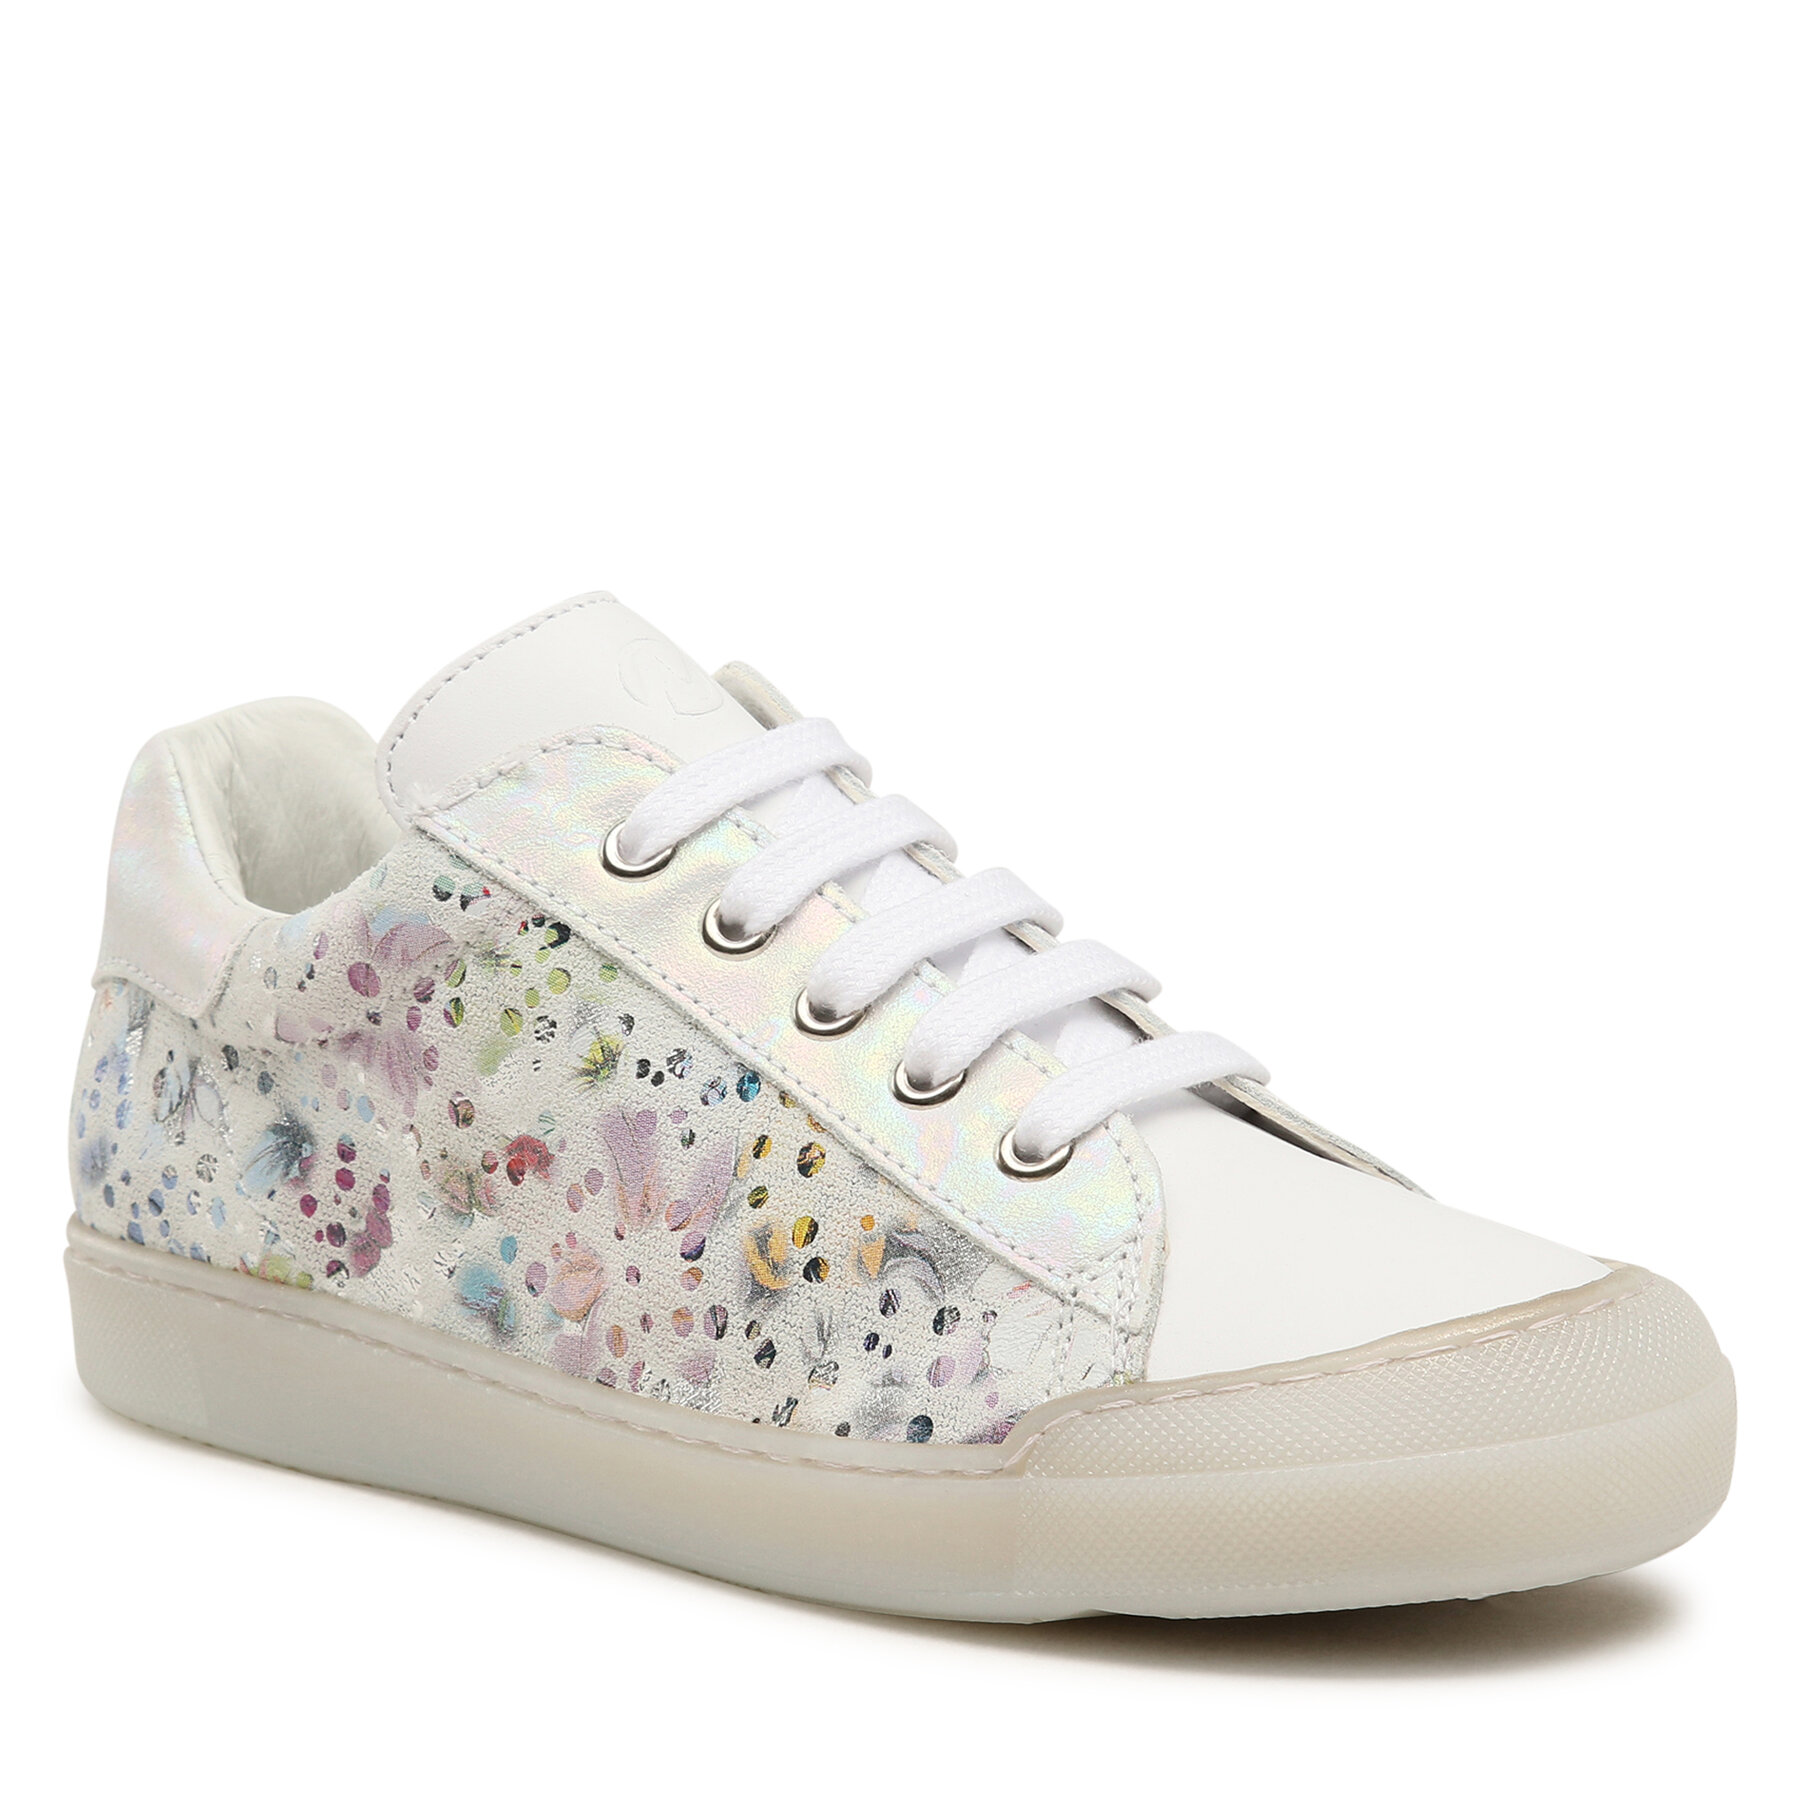 Sneakers Naturino Eindhoven 0012015848.30.0N01 D White